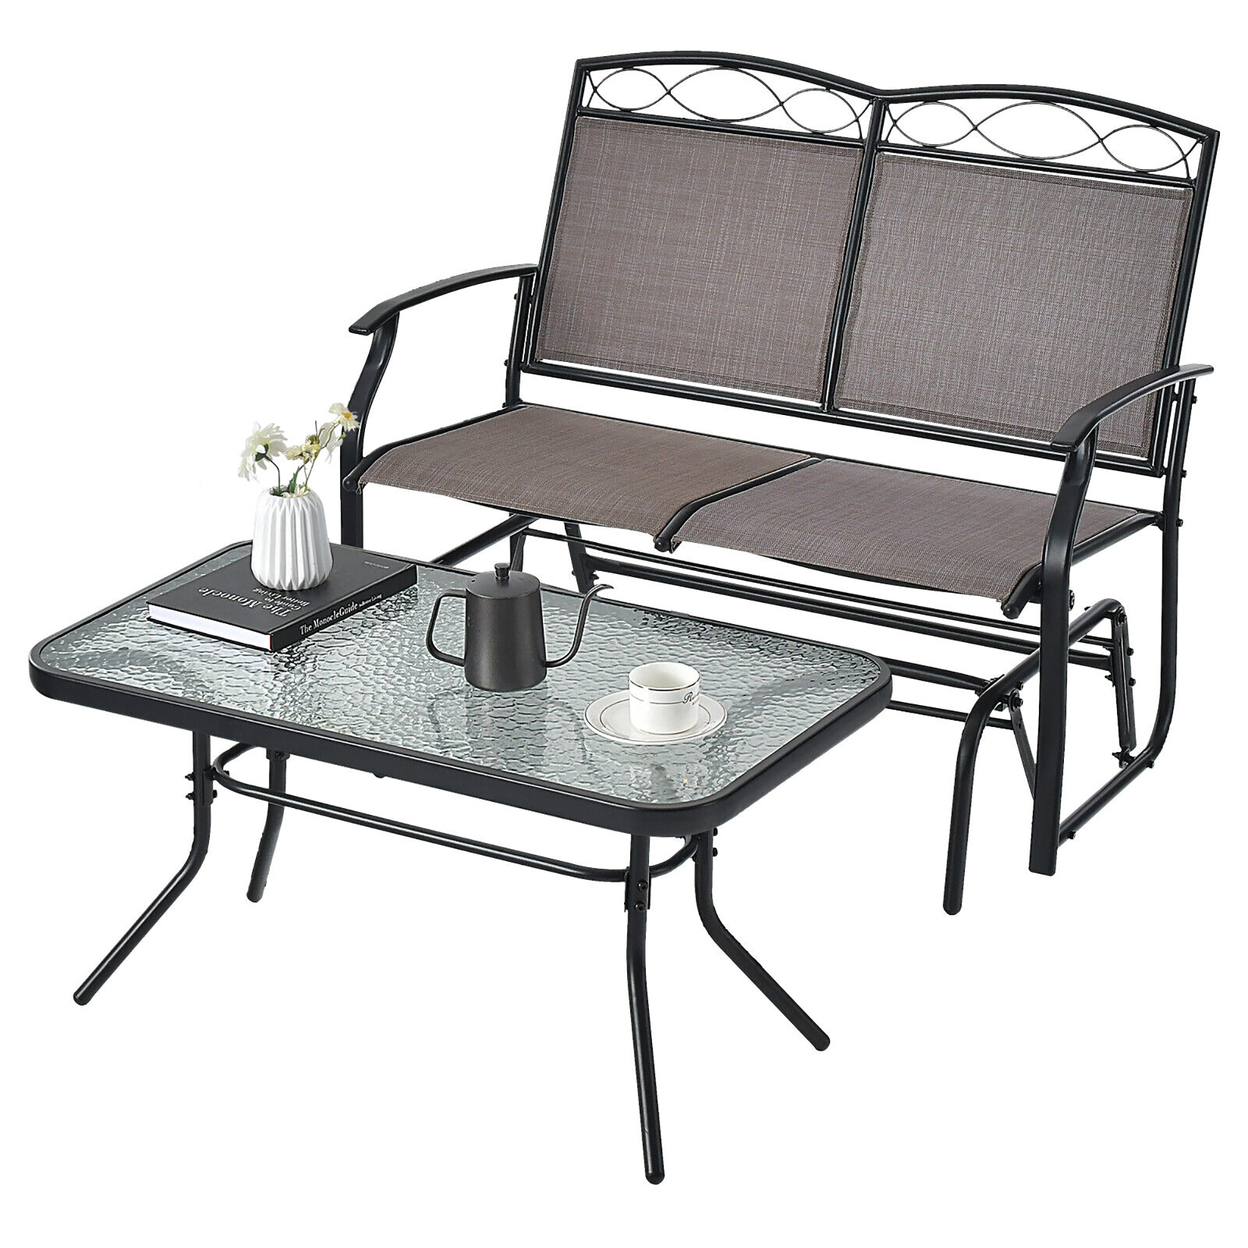 2 PCS Patio Glider Conversation Set Outdoor Loveseat Glider Chair W/ Tempered Glass Coffee Table